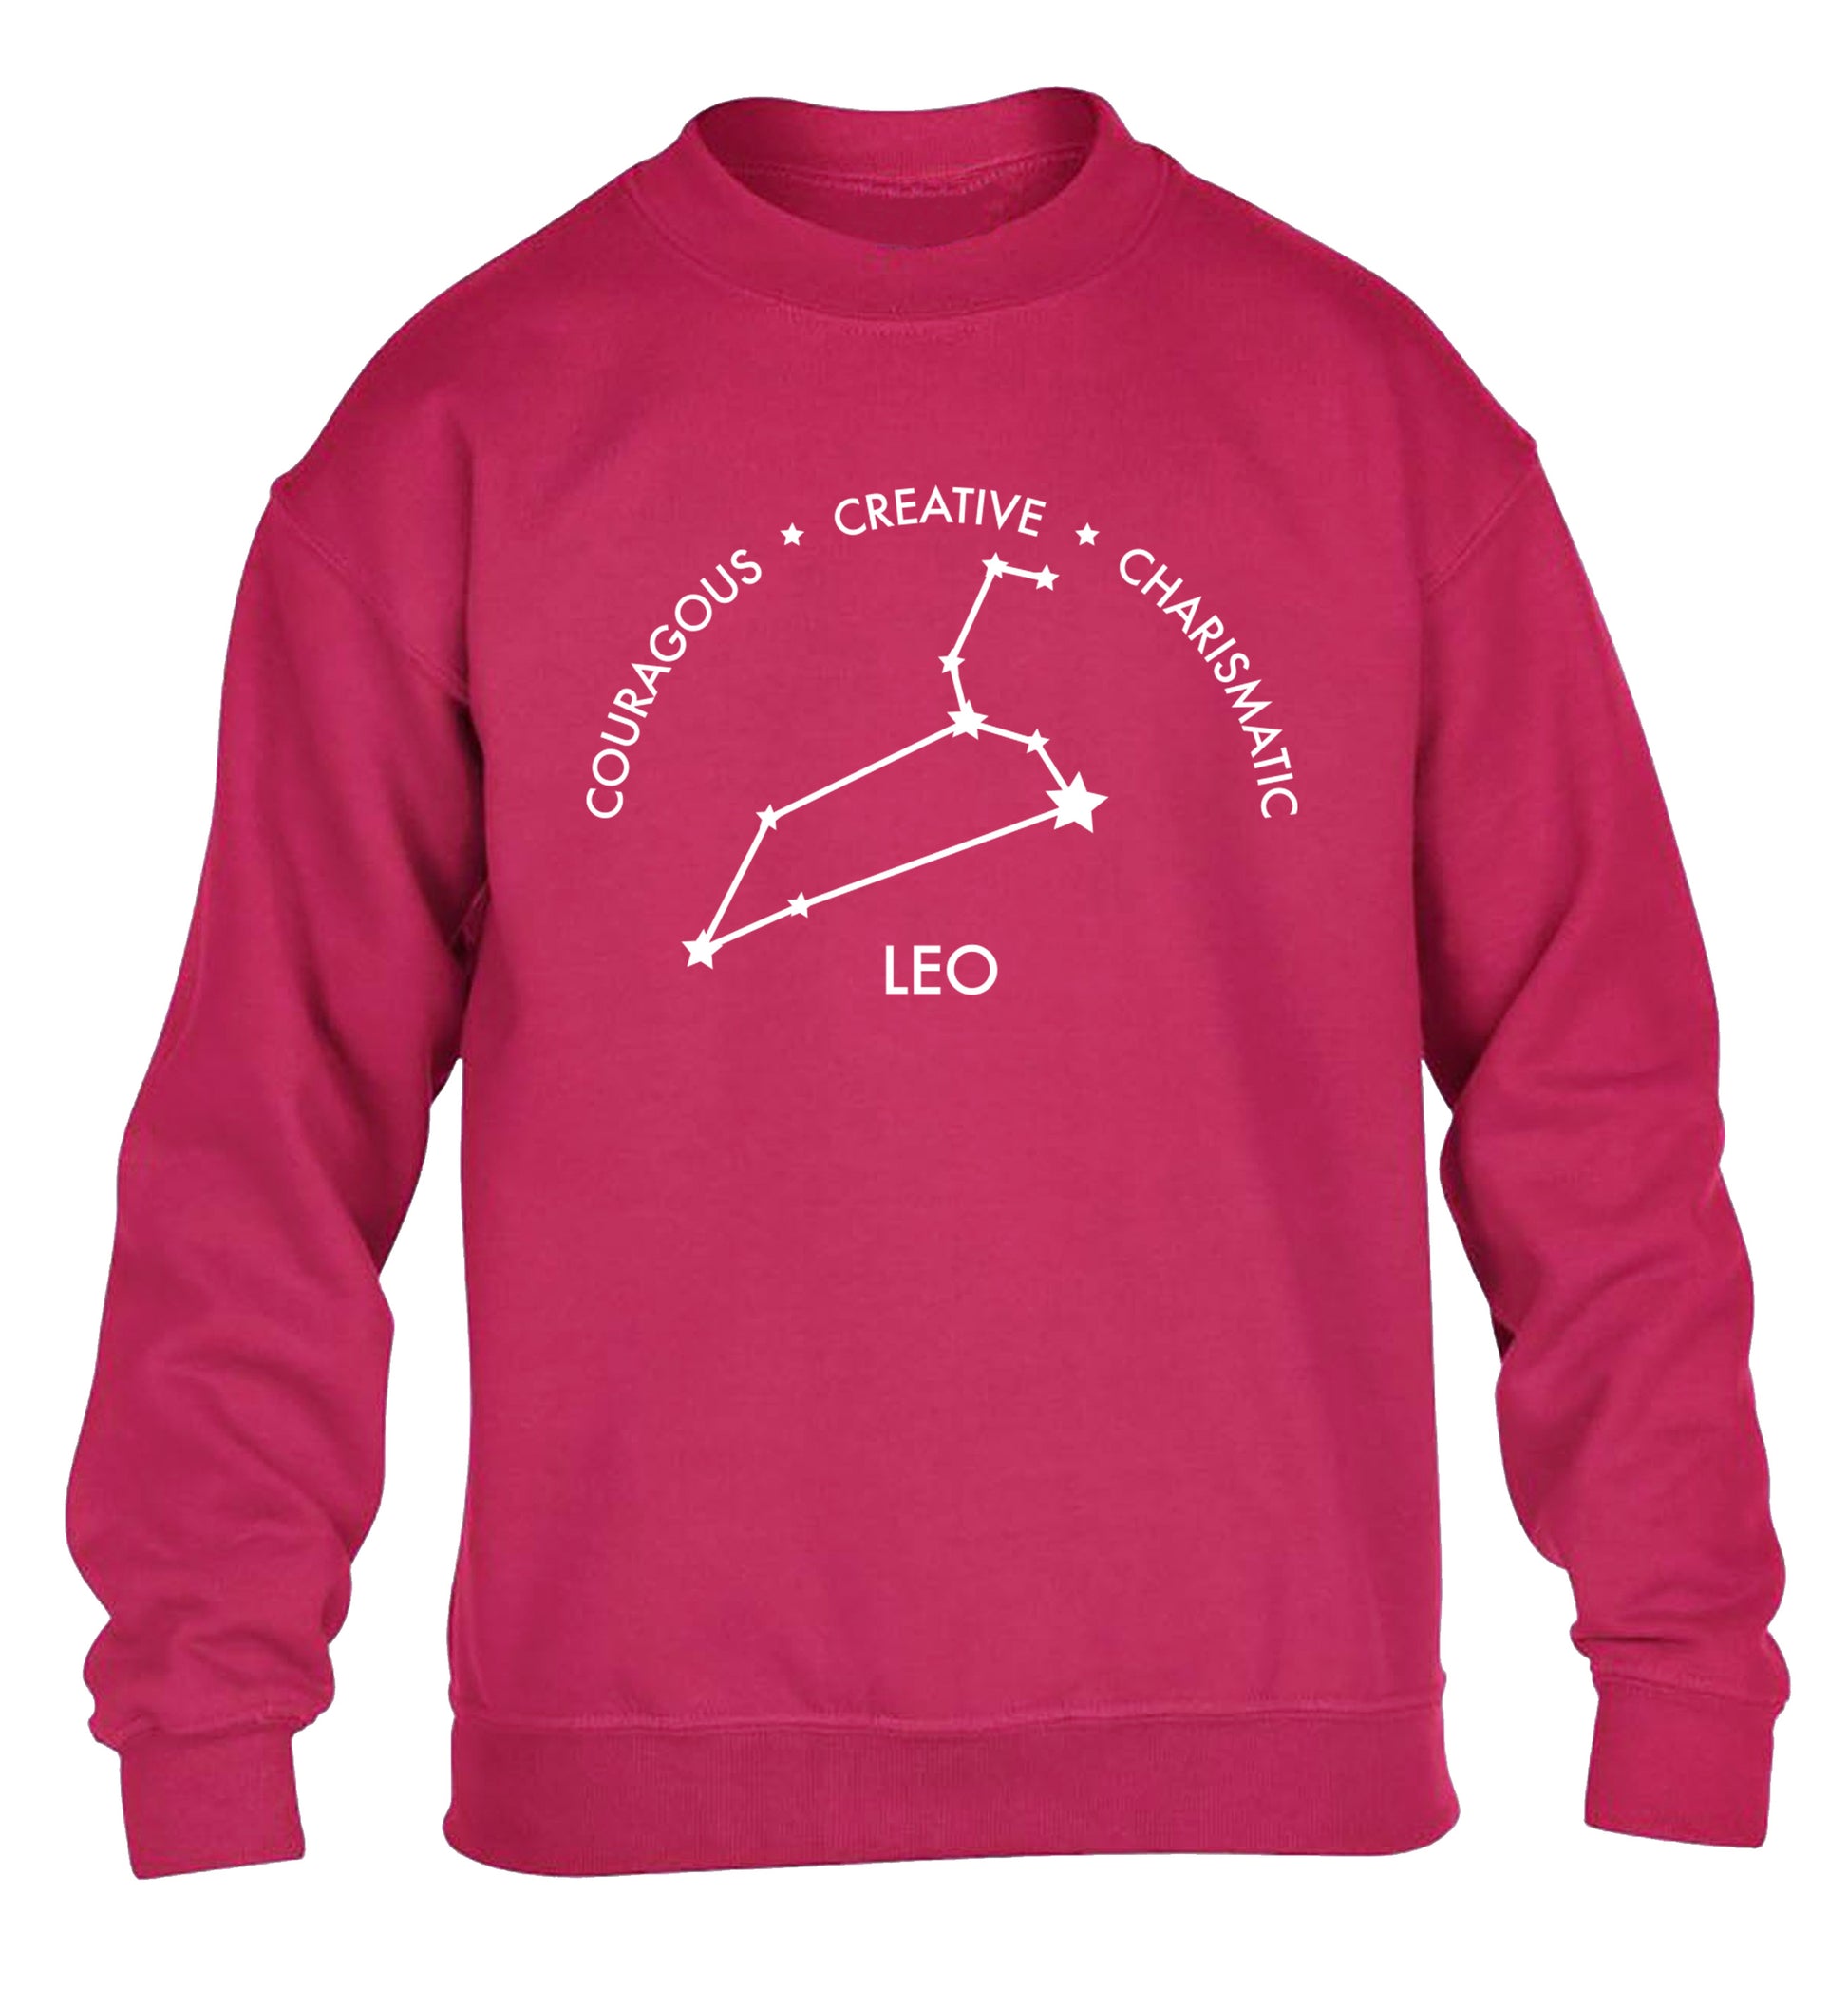 Leo - Courageous | Creative | Charismatic children's pink sweater 12-13 Years